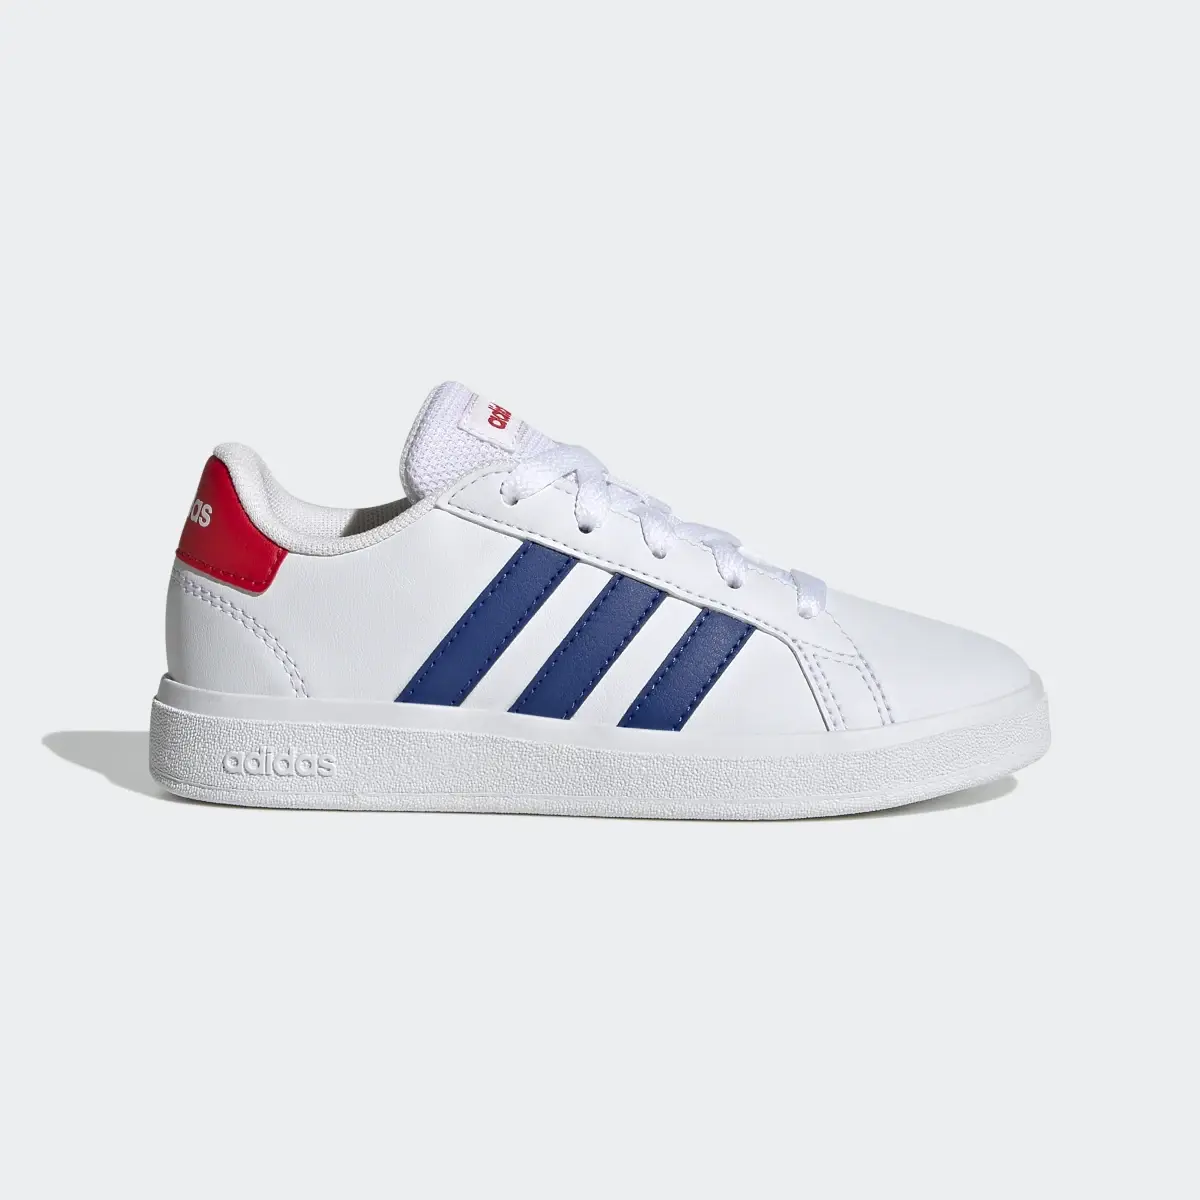 Adidas Grand Court Lifestyle Tennis Lace-Up Shoes. 2